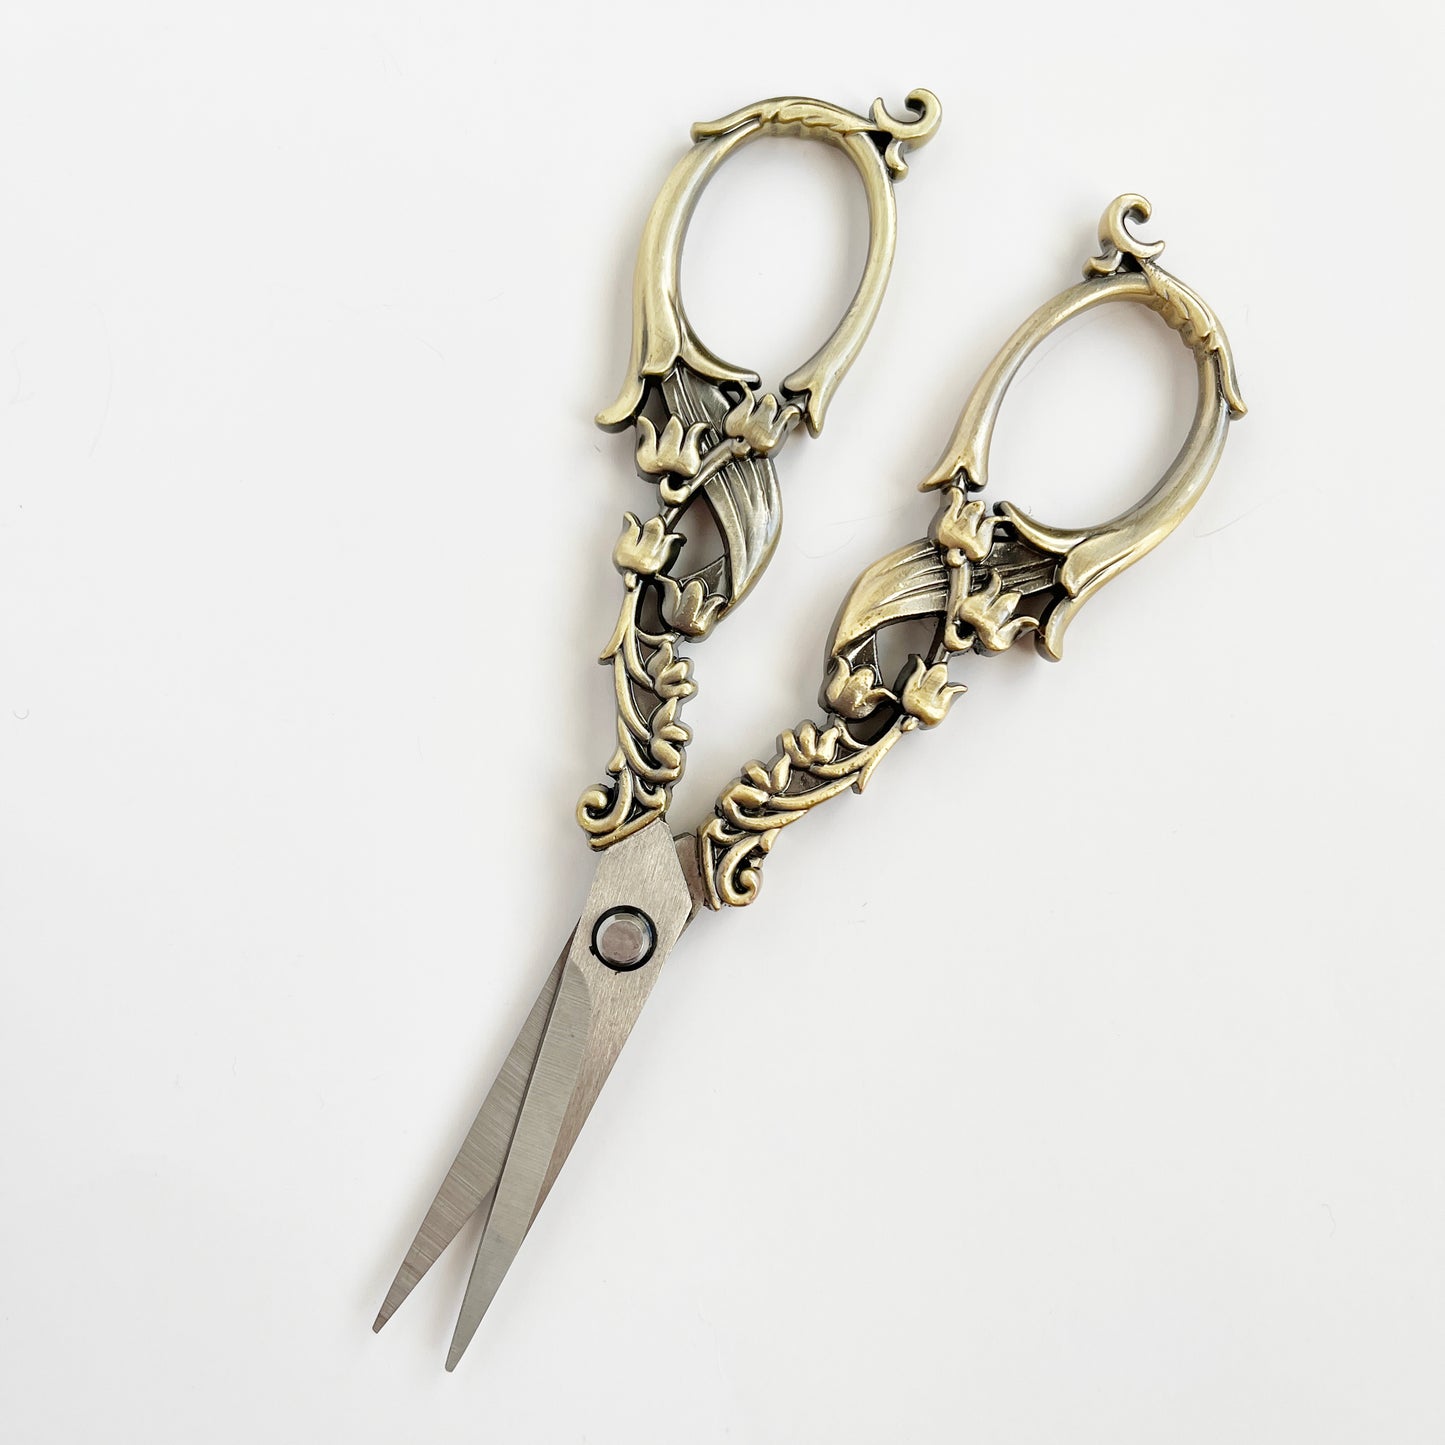 Lily of the Valley craft scissors